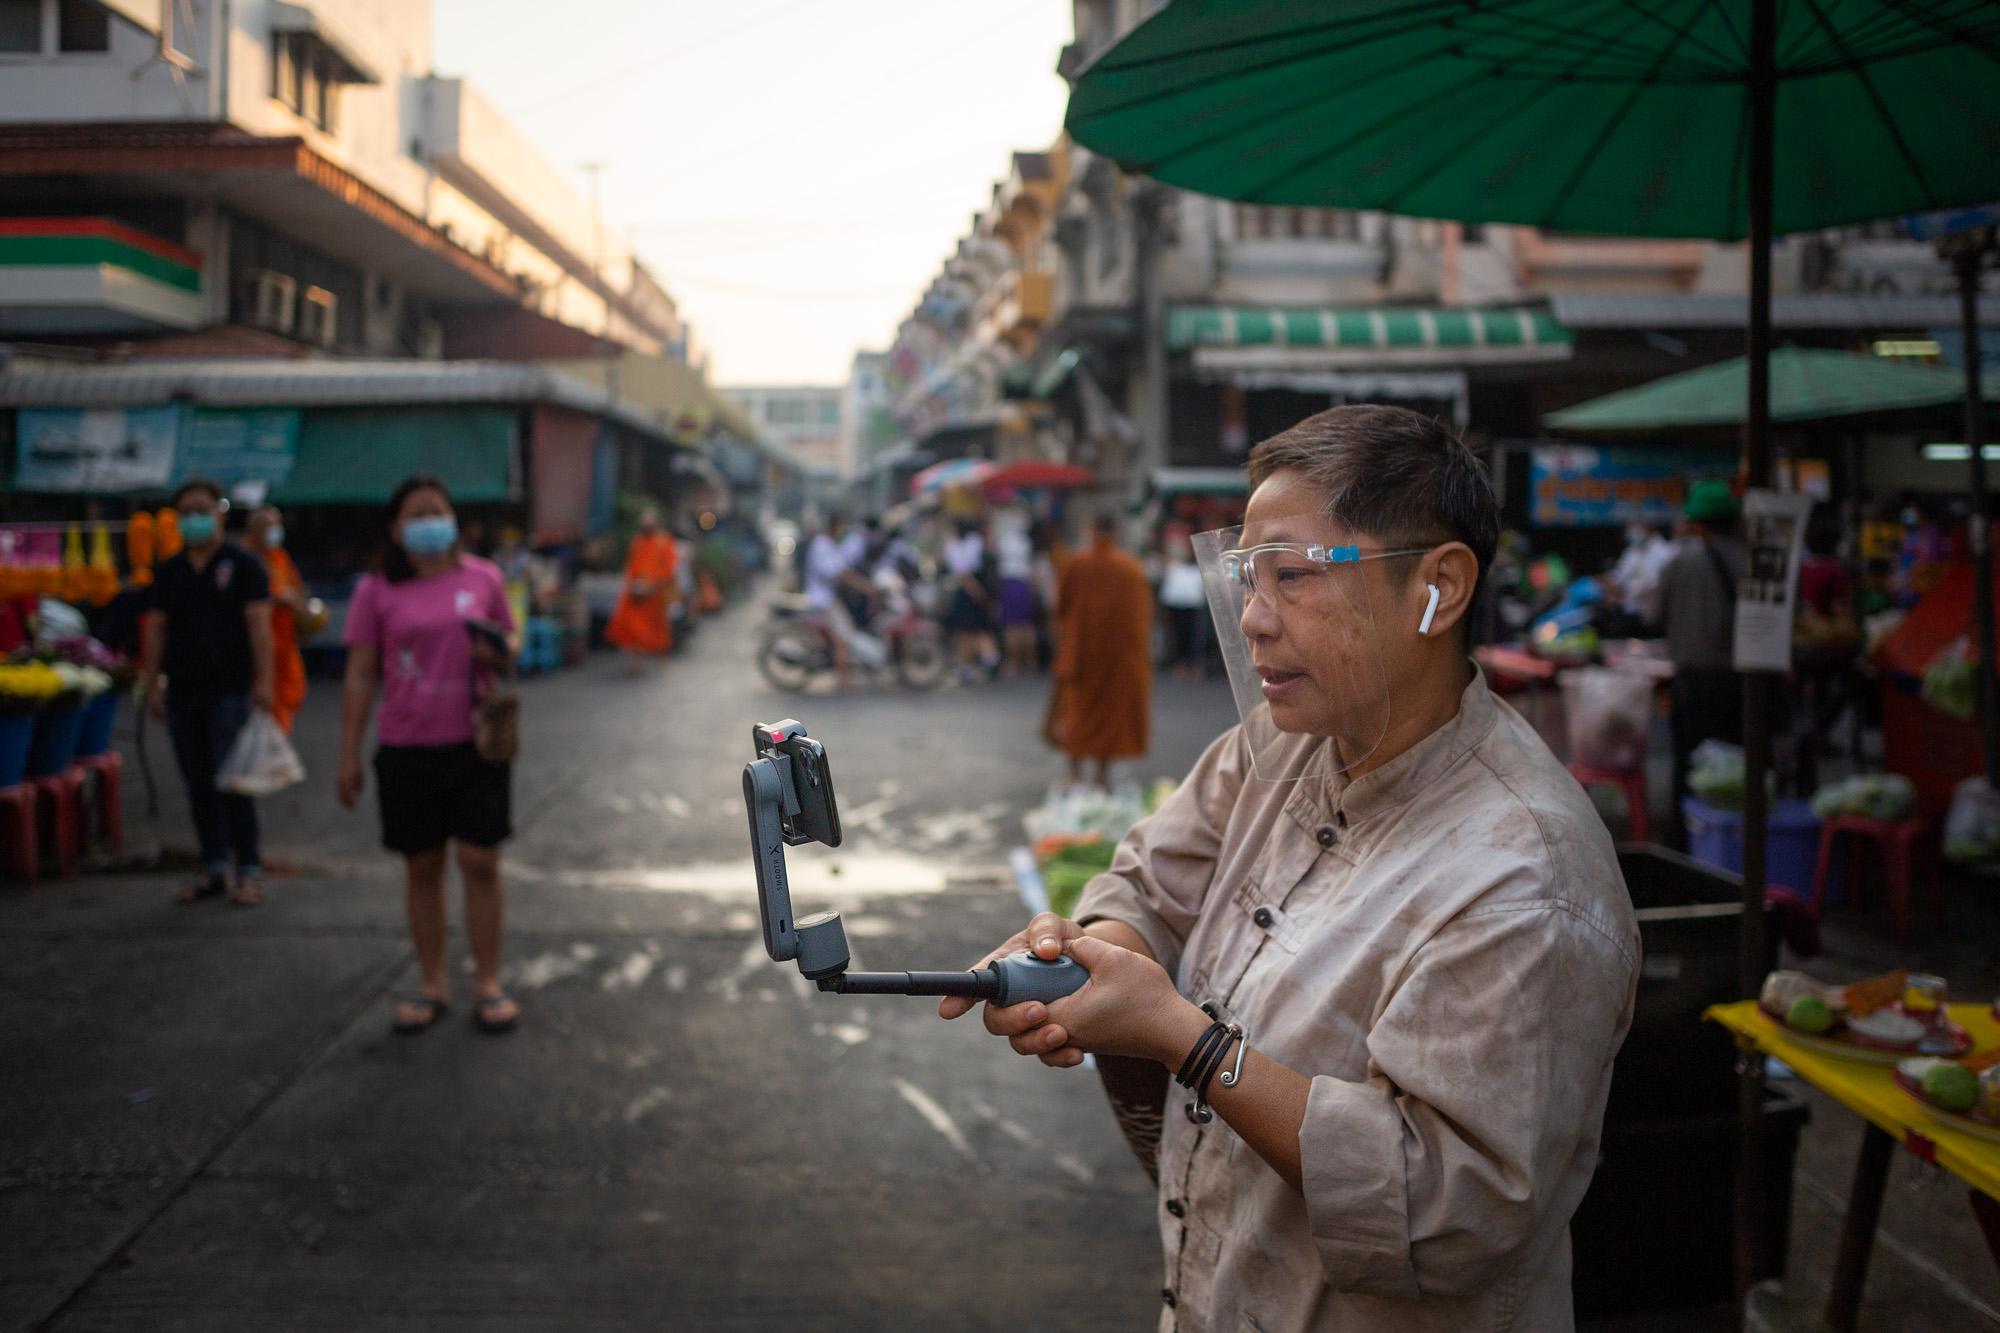 Hnoi Latthitham, 53, leads a virtual tour of Chai Chimplee Temple Market in Bangkok, Thailand, on Monday, February 1, 2021, in Bangkok, Thailand. She shows participants the hustle and bustle of morning life, and stops to explain rituals of alms giving to Buddhist monks.